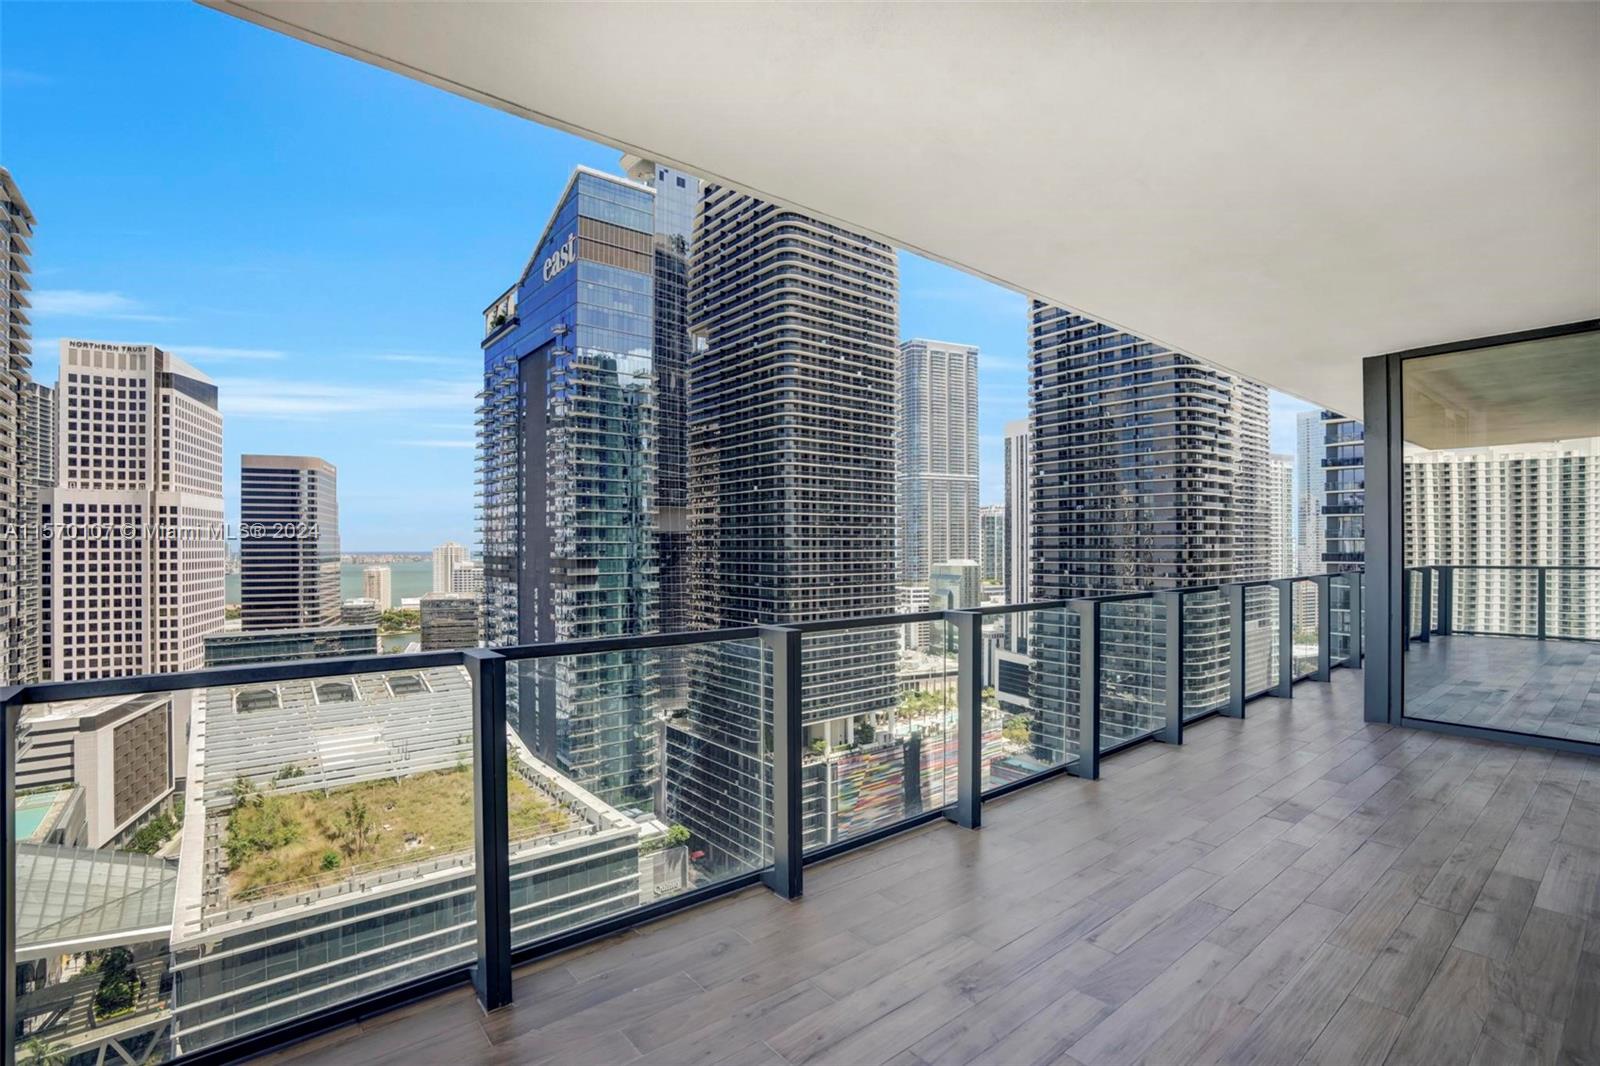 This fully remodeled 2-bed, 2.5-bath sanctuary boasts breathtaking sunrise views of Biscayne Bay and the City. Stride into elegance with 48x48 Gubi Porcelain tile flooring throughout. The modern kitchen features Italian cabinetry, honed marble countertops, premium Bosch appliances, and a wine cooler. Indulge in the primary bathroom's freestanding bathtub and stunning 120x120 Eco Ceramics wall tiles. 

Enjoy seamless indoor-outdoor living with a wrap-around balcony and floor-to-ceiling windows, complemented by electronic blinds in the bedrooms. Steps away from Brickell City Centre, The Rise Condo offers 5-star amenities, including a state-of-the-art fitness center, 24-hour concierge, valet services, heated pool, business center, child's playroom, Hamman spa, and steam room.